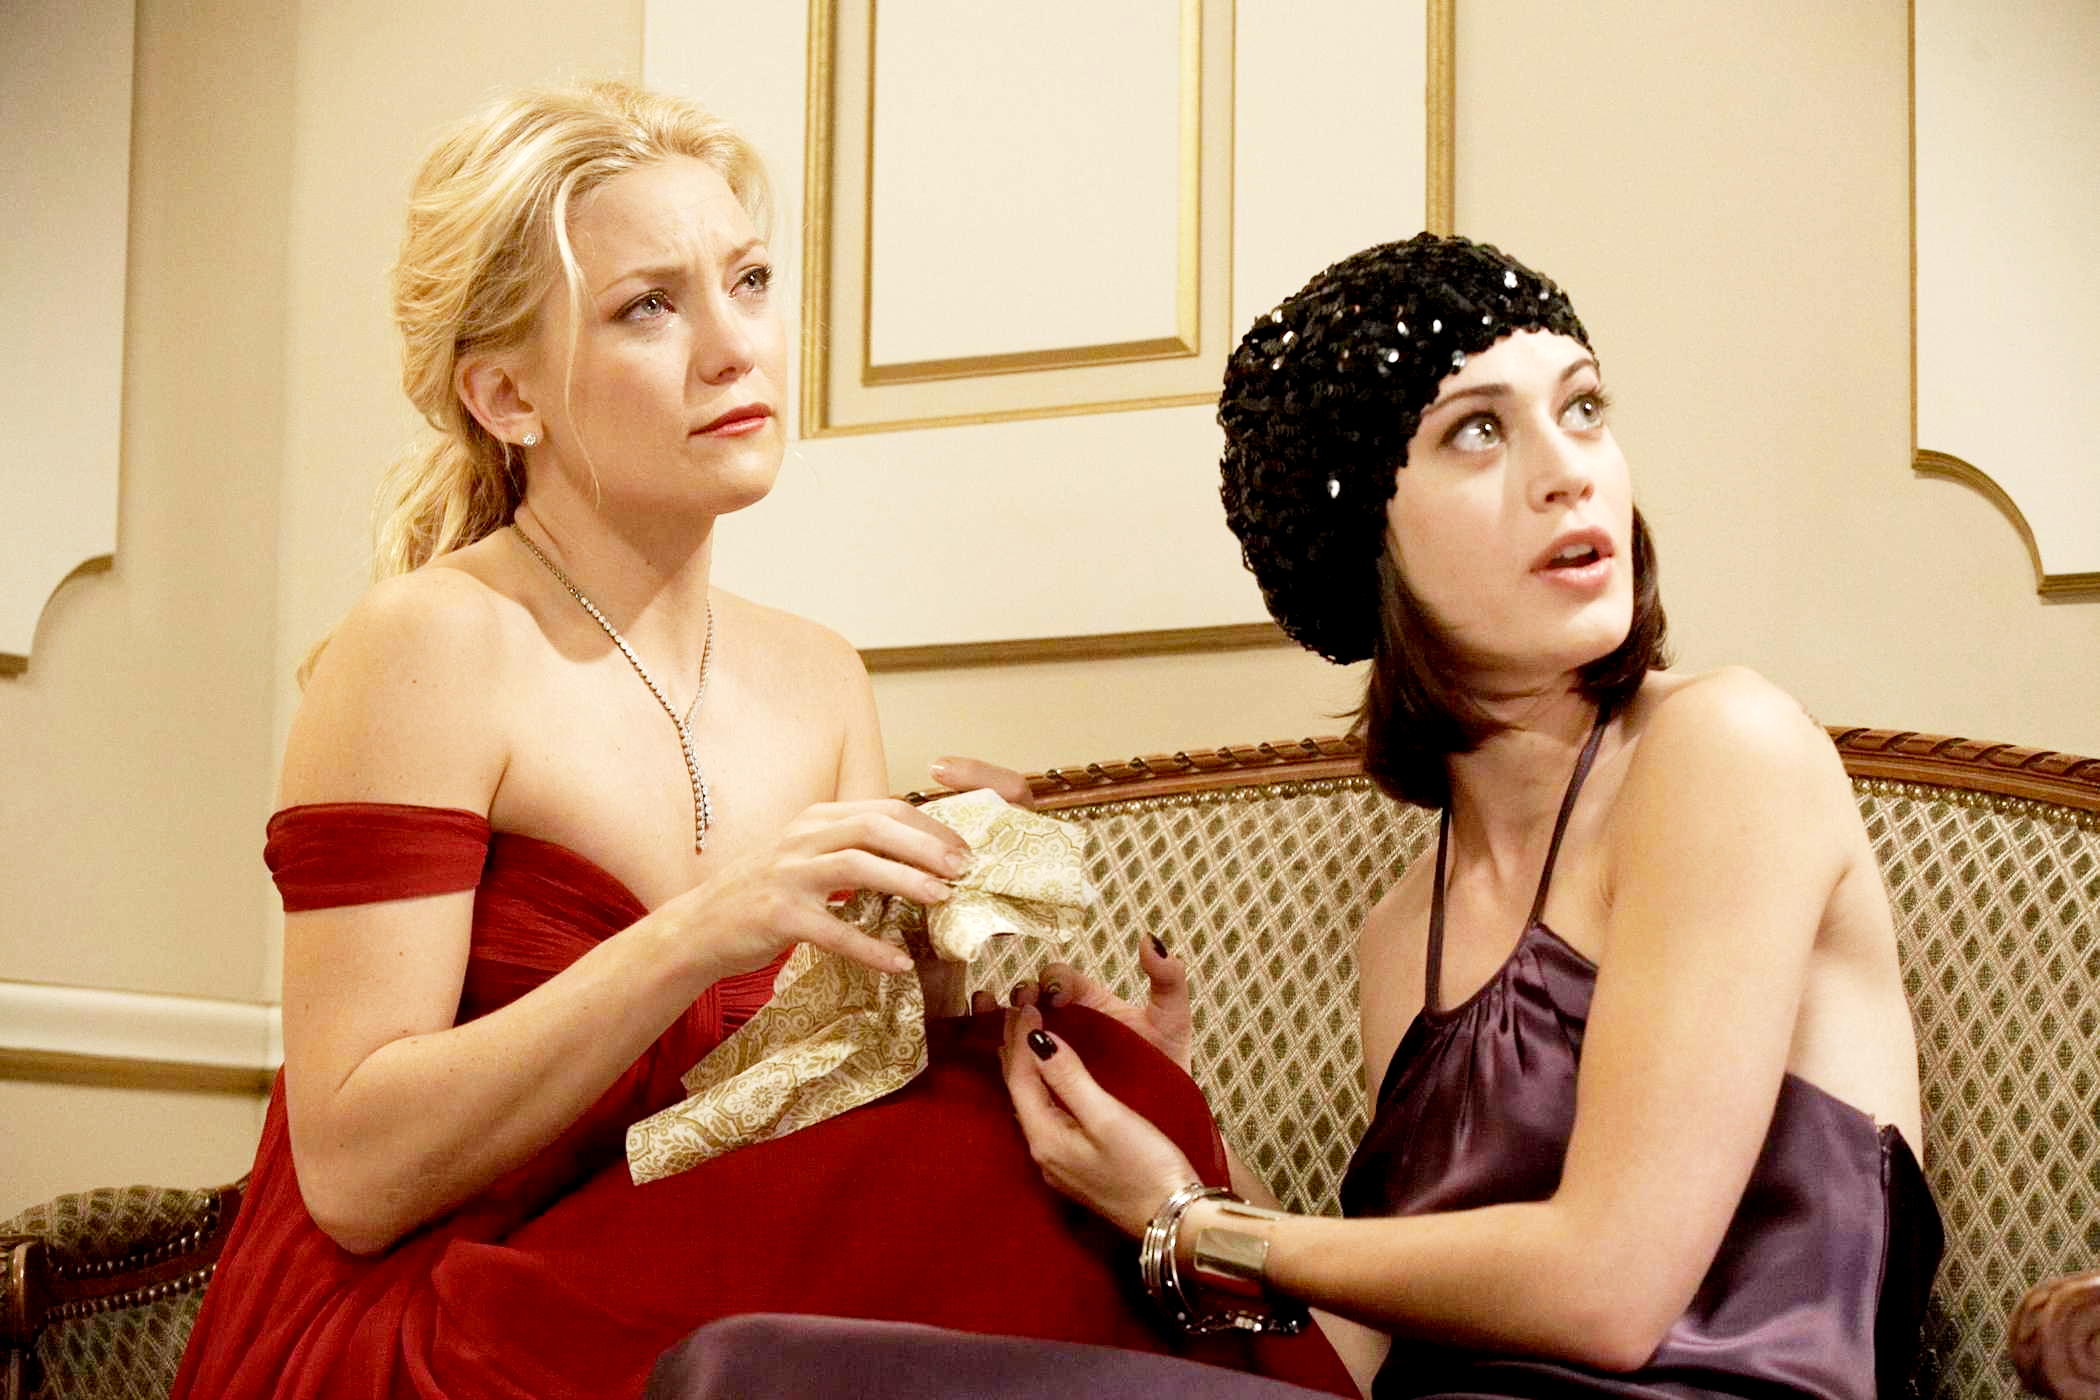 Kate Hudson stars as Alexis and Lizzy Caplan stars as Ami in Lions Gate Films' My Best Friend's Girl (2008). Photo credit by Claire Folger.